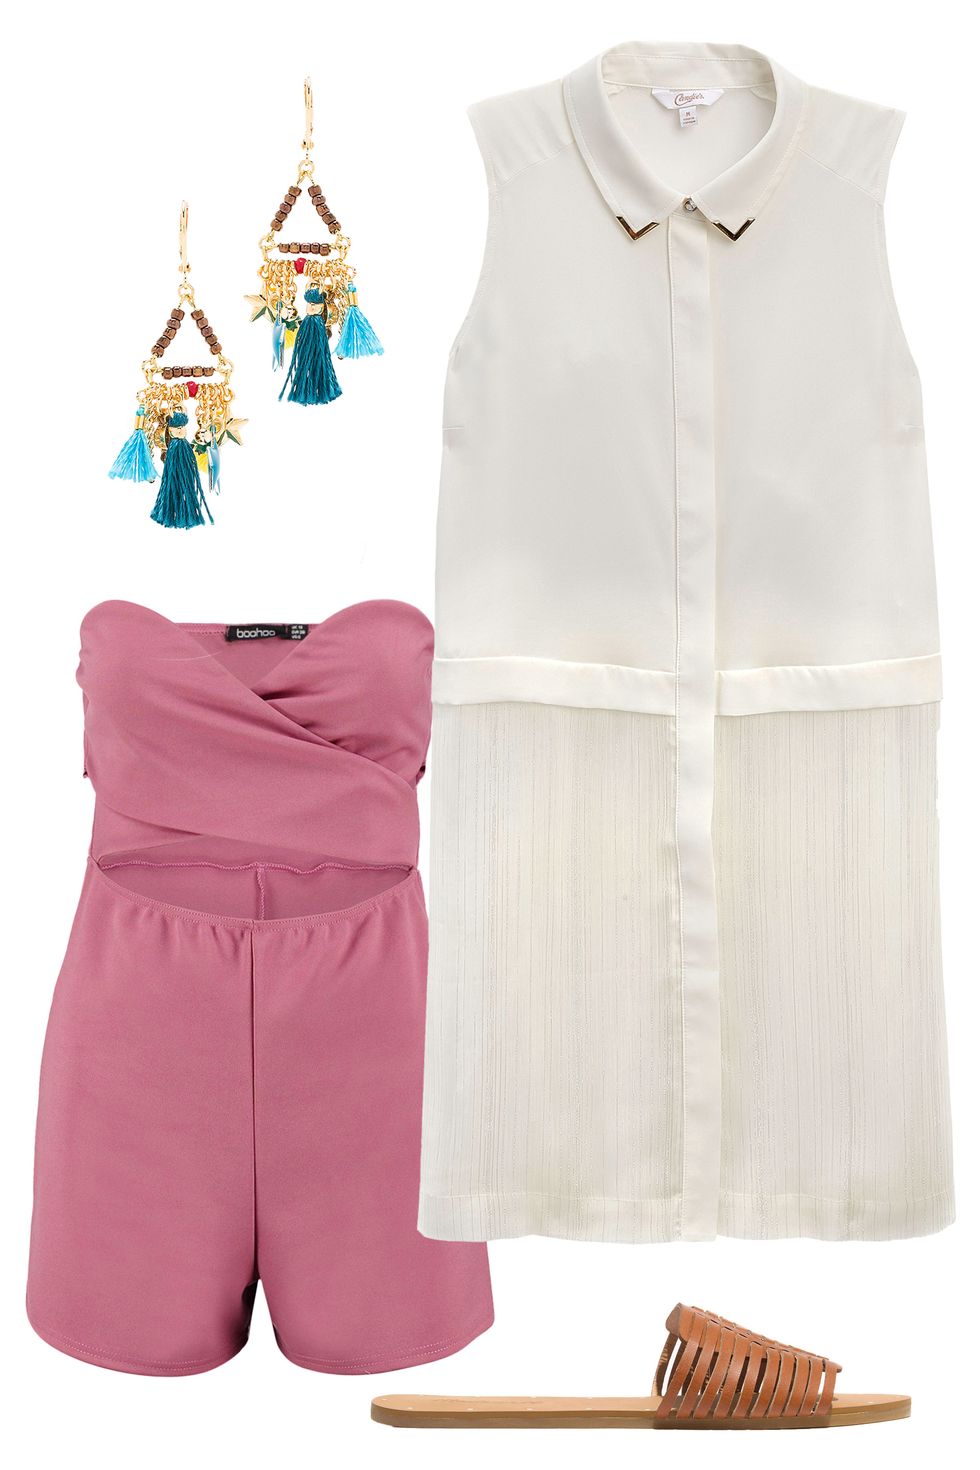 <p>Take the top from boardroom boss to total beach babe with a few key accessories. Wear it open over a cheeky cut-out romper, and slip on neutral sandals and colorful tassel earrings. Hellooo, weekend!<em> </em></p><p><em><br></em></p><p><em><i><a href="http://www.kohls.com/product/prd-2586786/juniors-candies-button-front-tunic-shirt.jsp?color=Marshmallow&cid=DIS16FallTPR4&utm_campaign=201607_Candies_Cosmo&utm_medium=3p_dis&utm_source=Candies&utm_content=ad_1" target="_blank">Button-Front Tunic Shirt</a>, CANDIE'S, $38</i></em>; <em><a href="http://www.boohoo.com/boohoo/ebiz/boohoo/invt/dzz71948" target="_blank">Ava Strapless Bandeau Cut Front Playsuit</a></em><i>, BOOHOO, $26; <a href="http://www.revolve.com/shashi-lilu-charm-earrings-in-pyrite/dp/SHAS-WL40/?d=Womens" target="_blank">Lilu Charm Earrings</a>, SHASHI, $66; <a href="https://www.madewell.com/madewell_category/SHOESANDBOOTS/sandals/PRDOVR~F1691/F1691.jsp?color_name=english-saddle" target="_blank">The Willa Slide Sandal</a>, MADEWELL, $59.99<strong></strong></i></p>